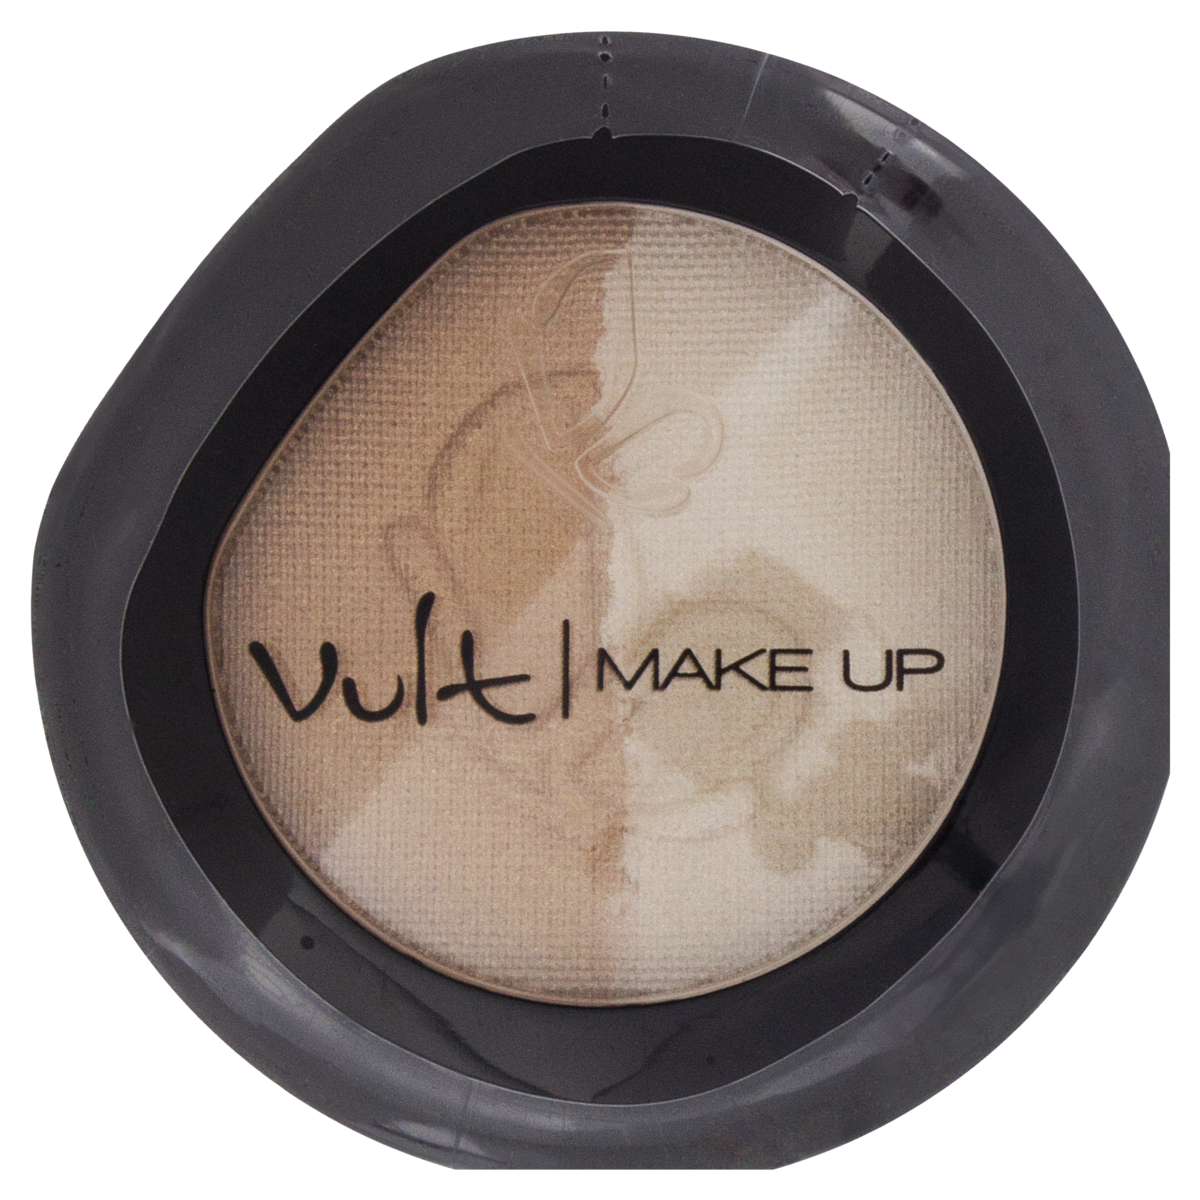 7898417962041 - SOMBRA DUO 04 VULT MAKE UP 2,5G